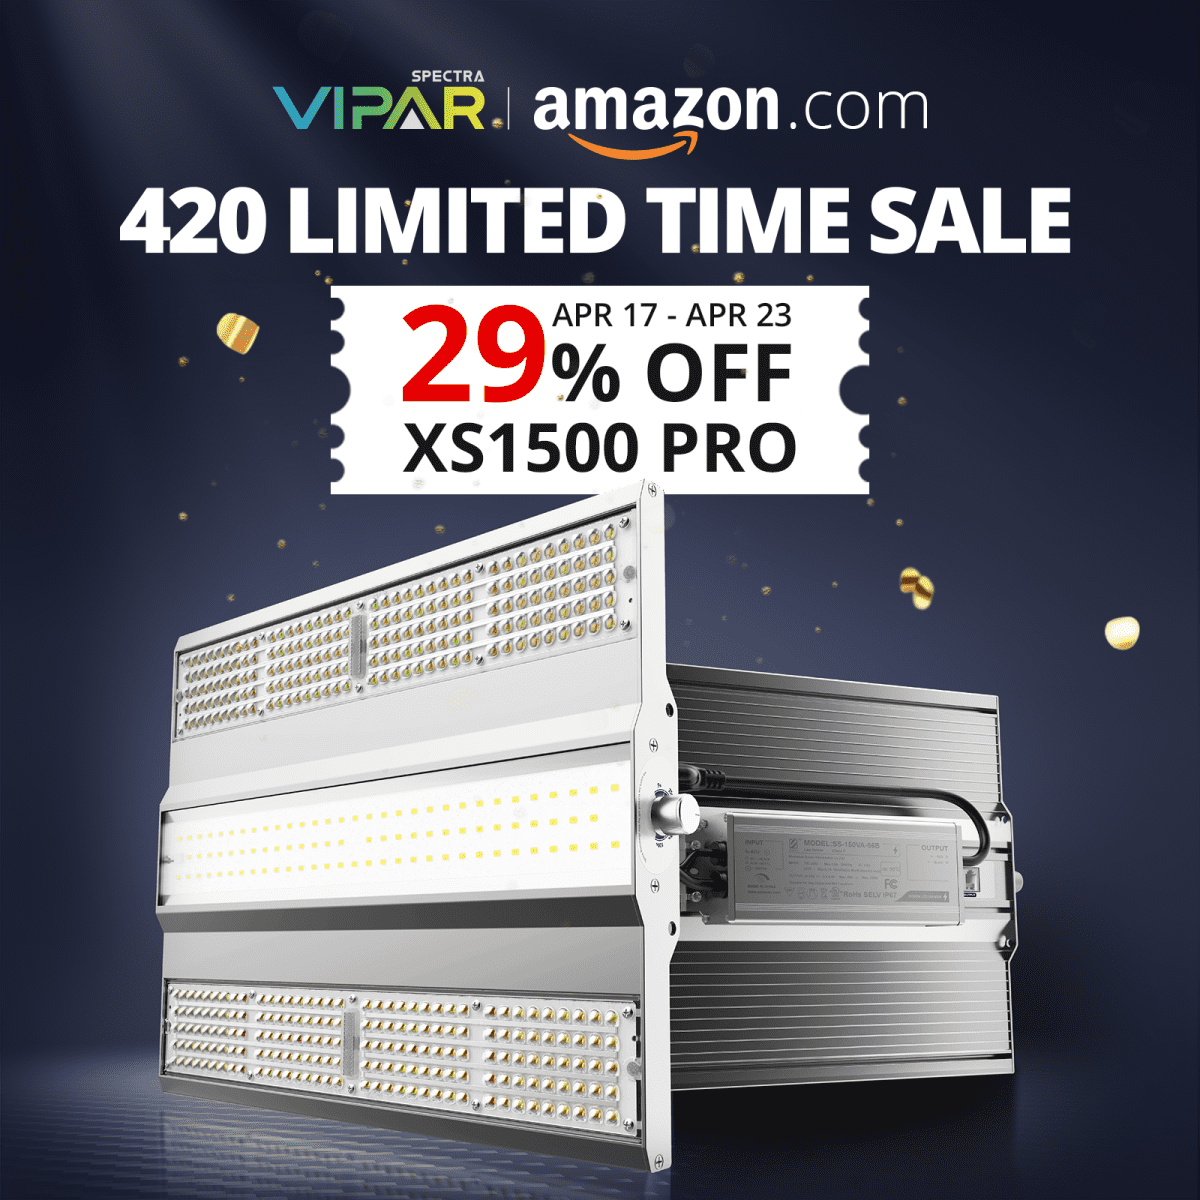 VIPARSPECTRA 420 LIMITED TIME SALE